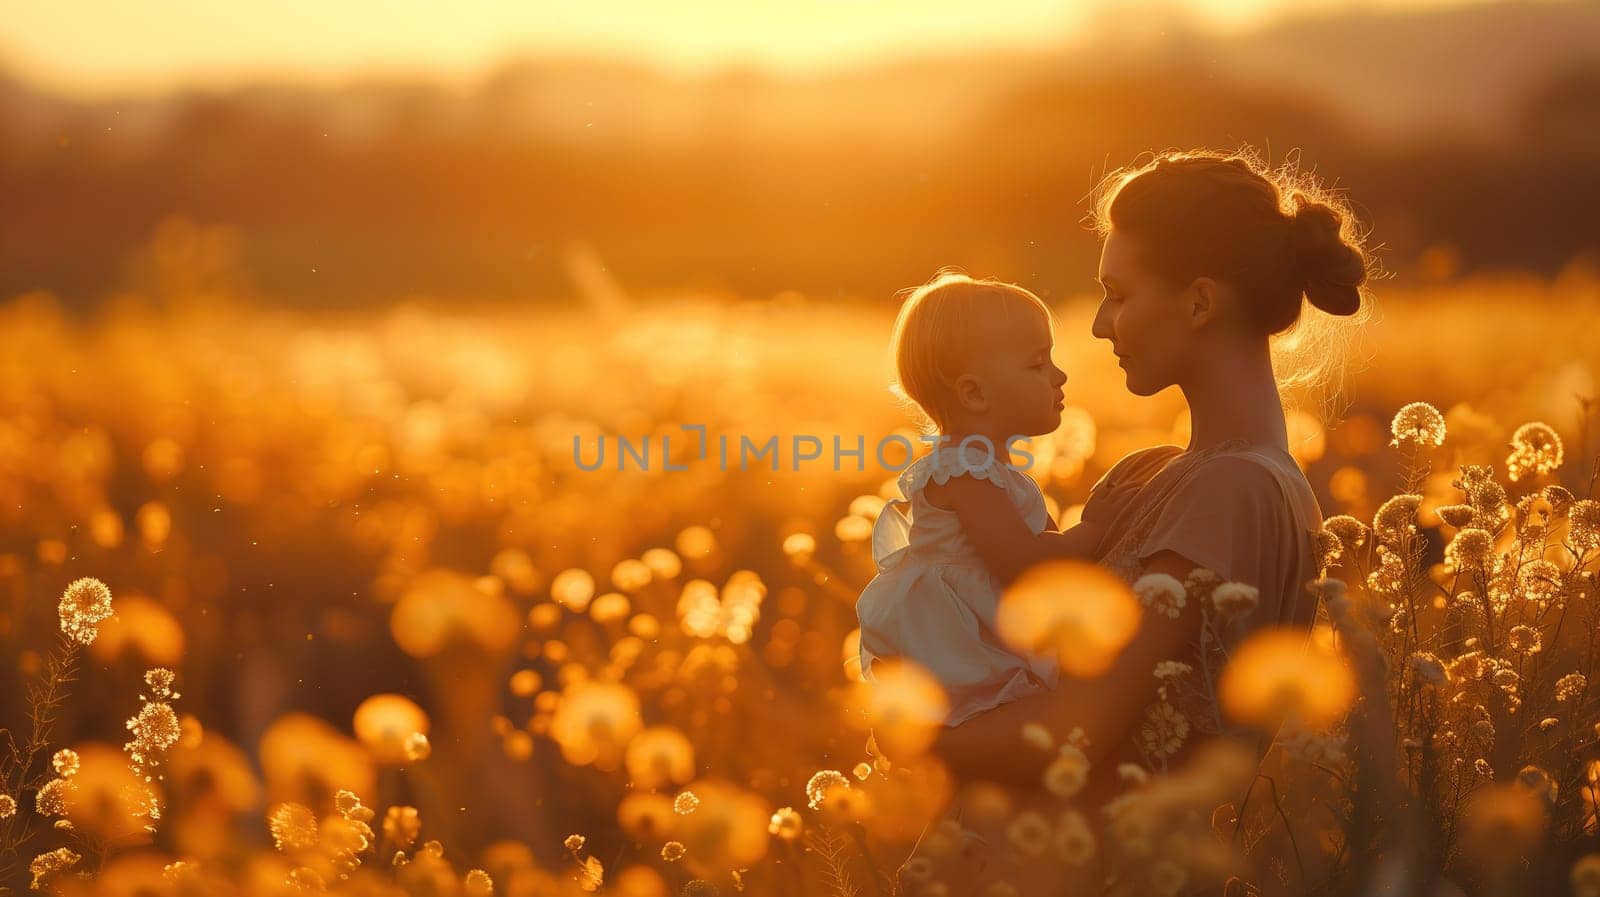 A woman and a child are standing in a field filled with yellow dandelion flowers. The woman is holding the childs hand as they both gaze at the vast expanse of flowers.